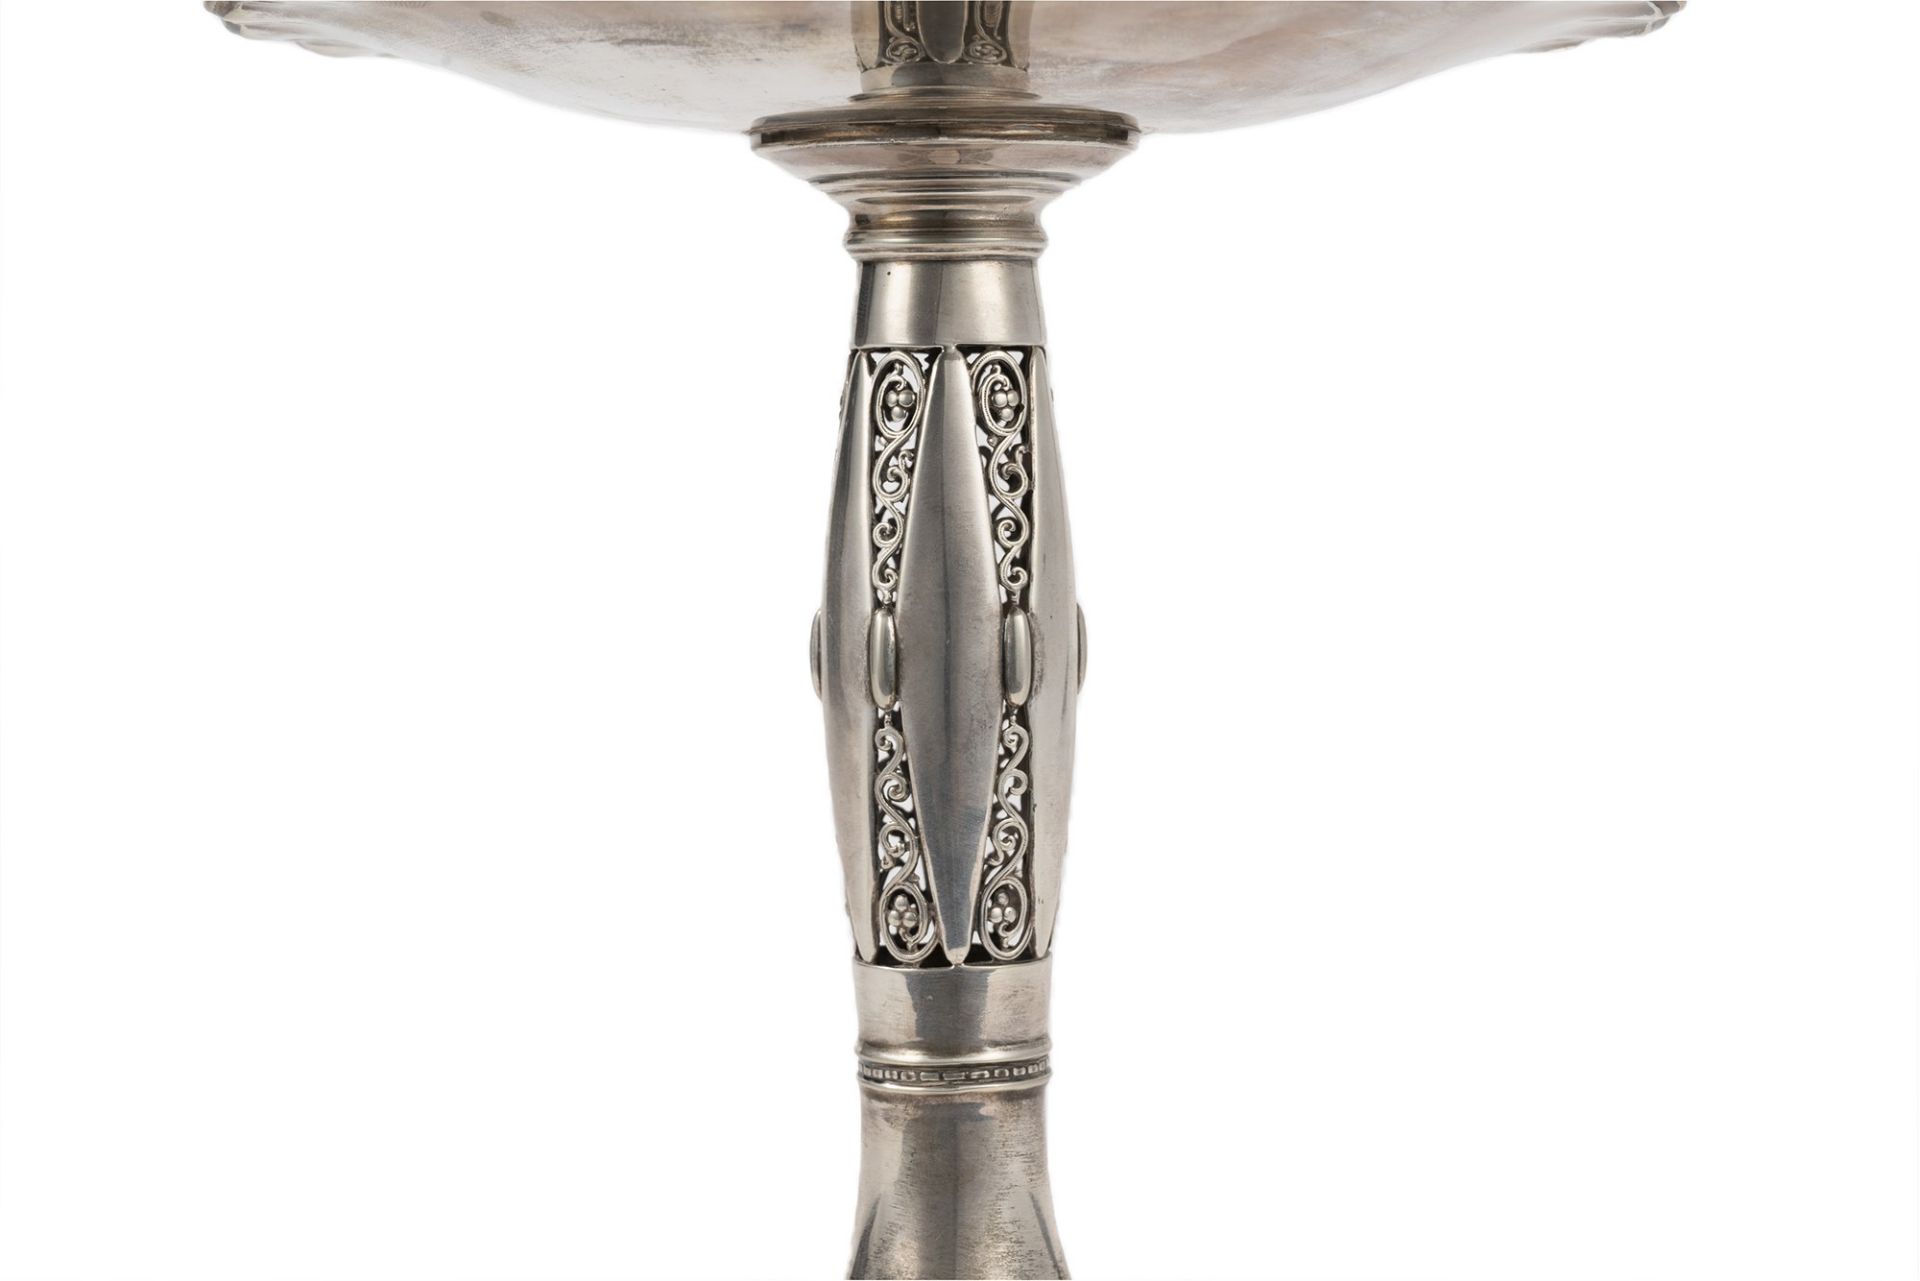 Embossed, pierced and chiseled silver stand, Germany, early 20th century - Image 3 of 4